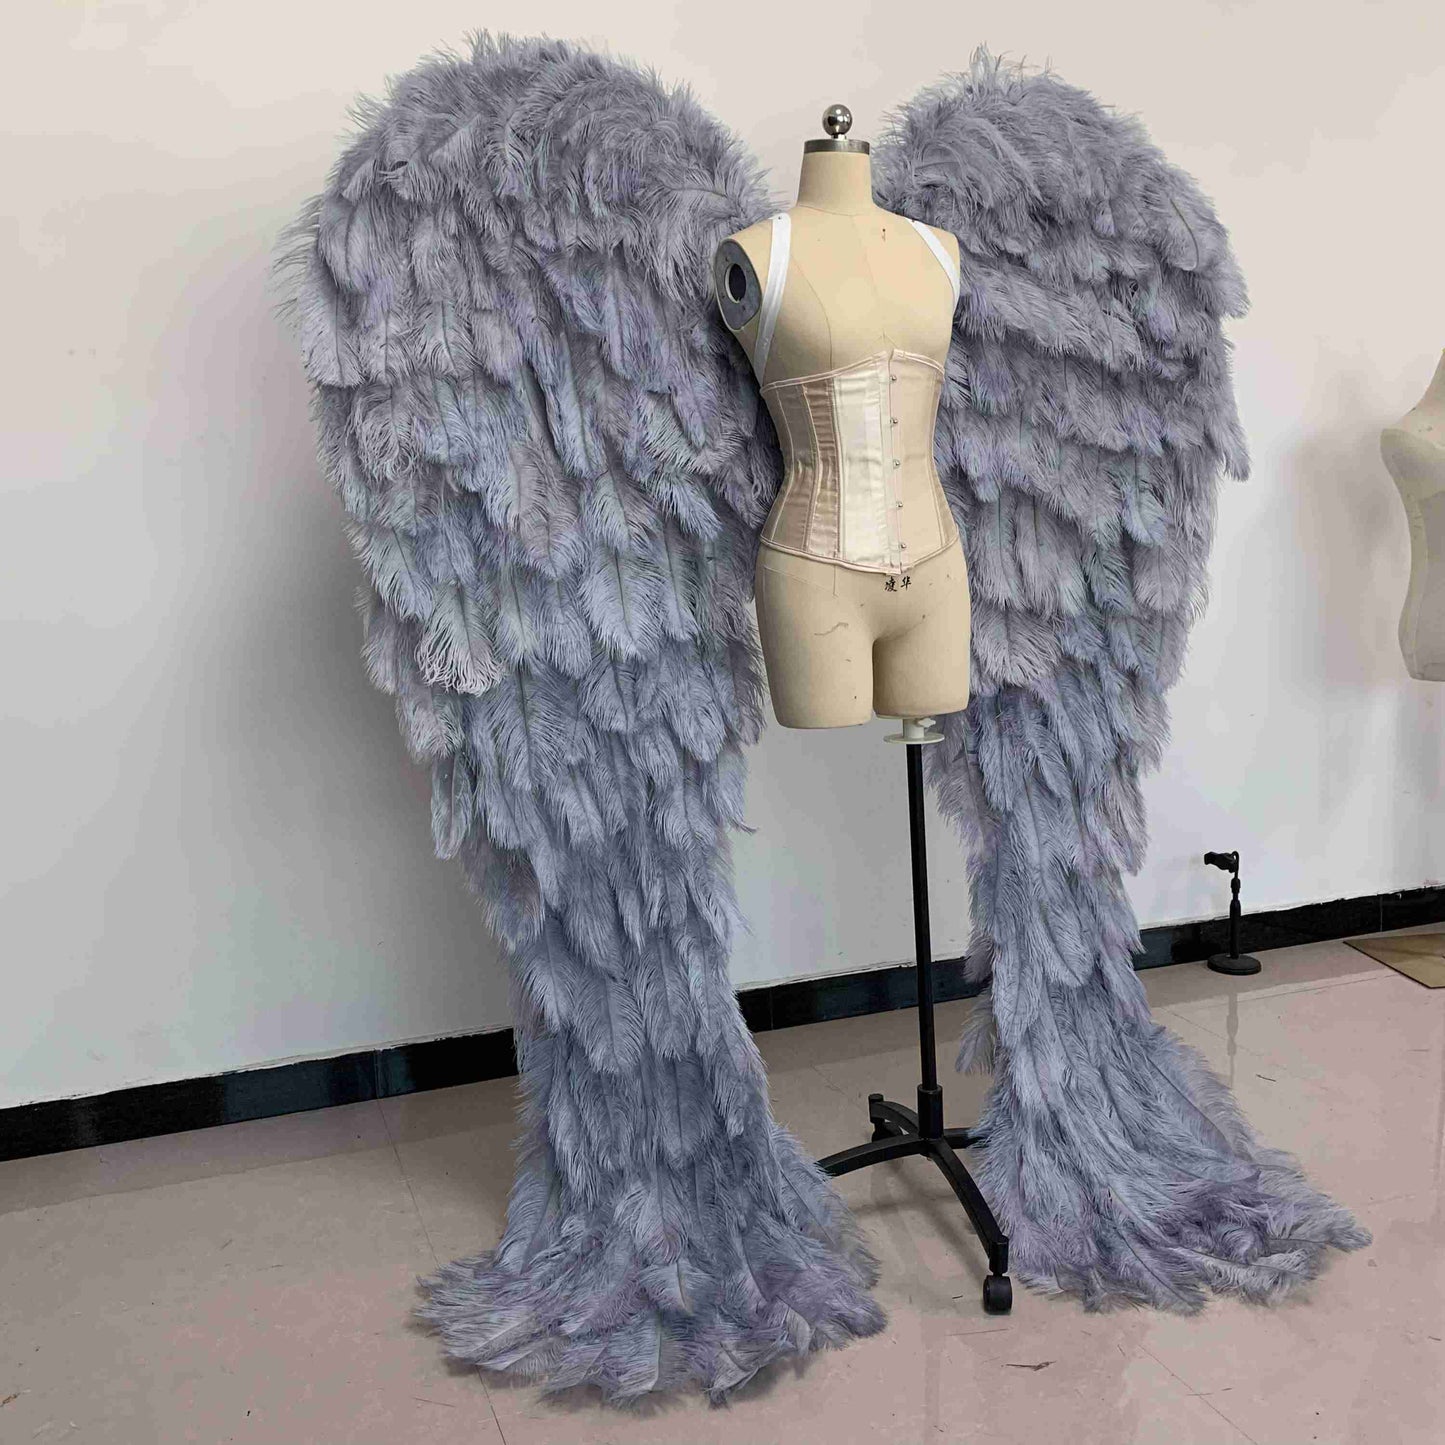 Our luxury gray angel wings from the right side. Made from ostrich feathers. Wings for angel costume. Suitable for photoshoots especially for boudoirs.